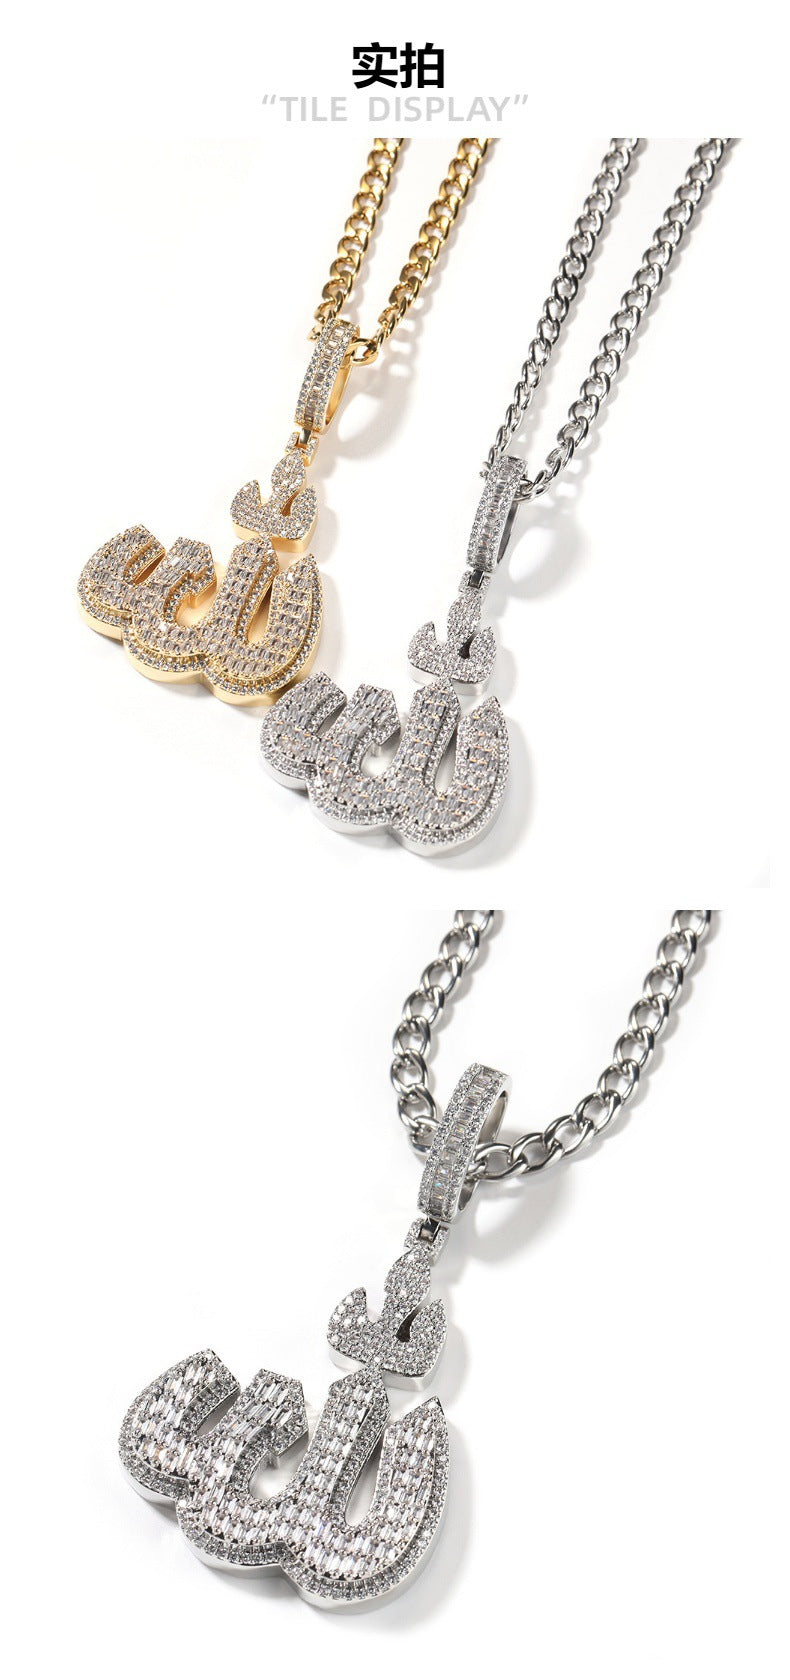 VVS JEWELRY ICY ALLAH PENDANT NECKLACE